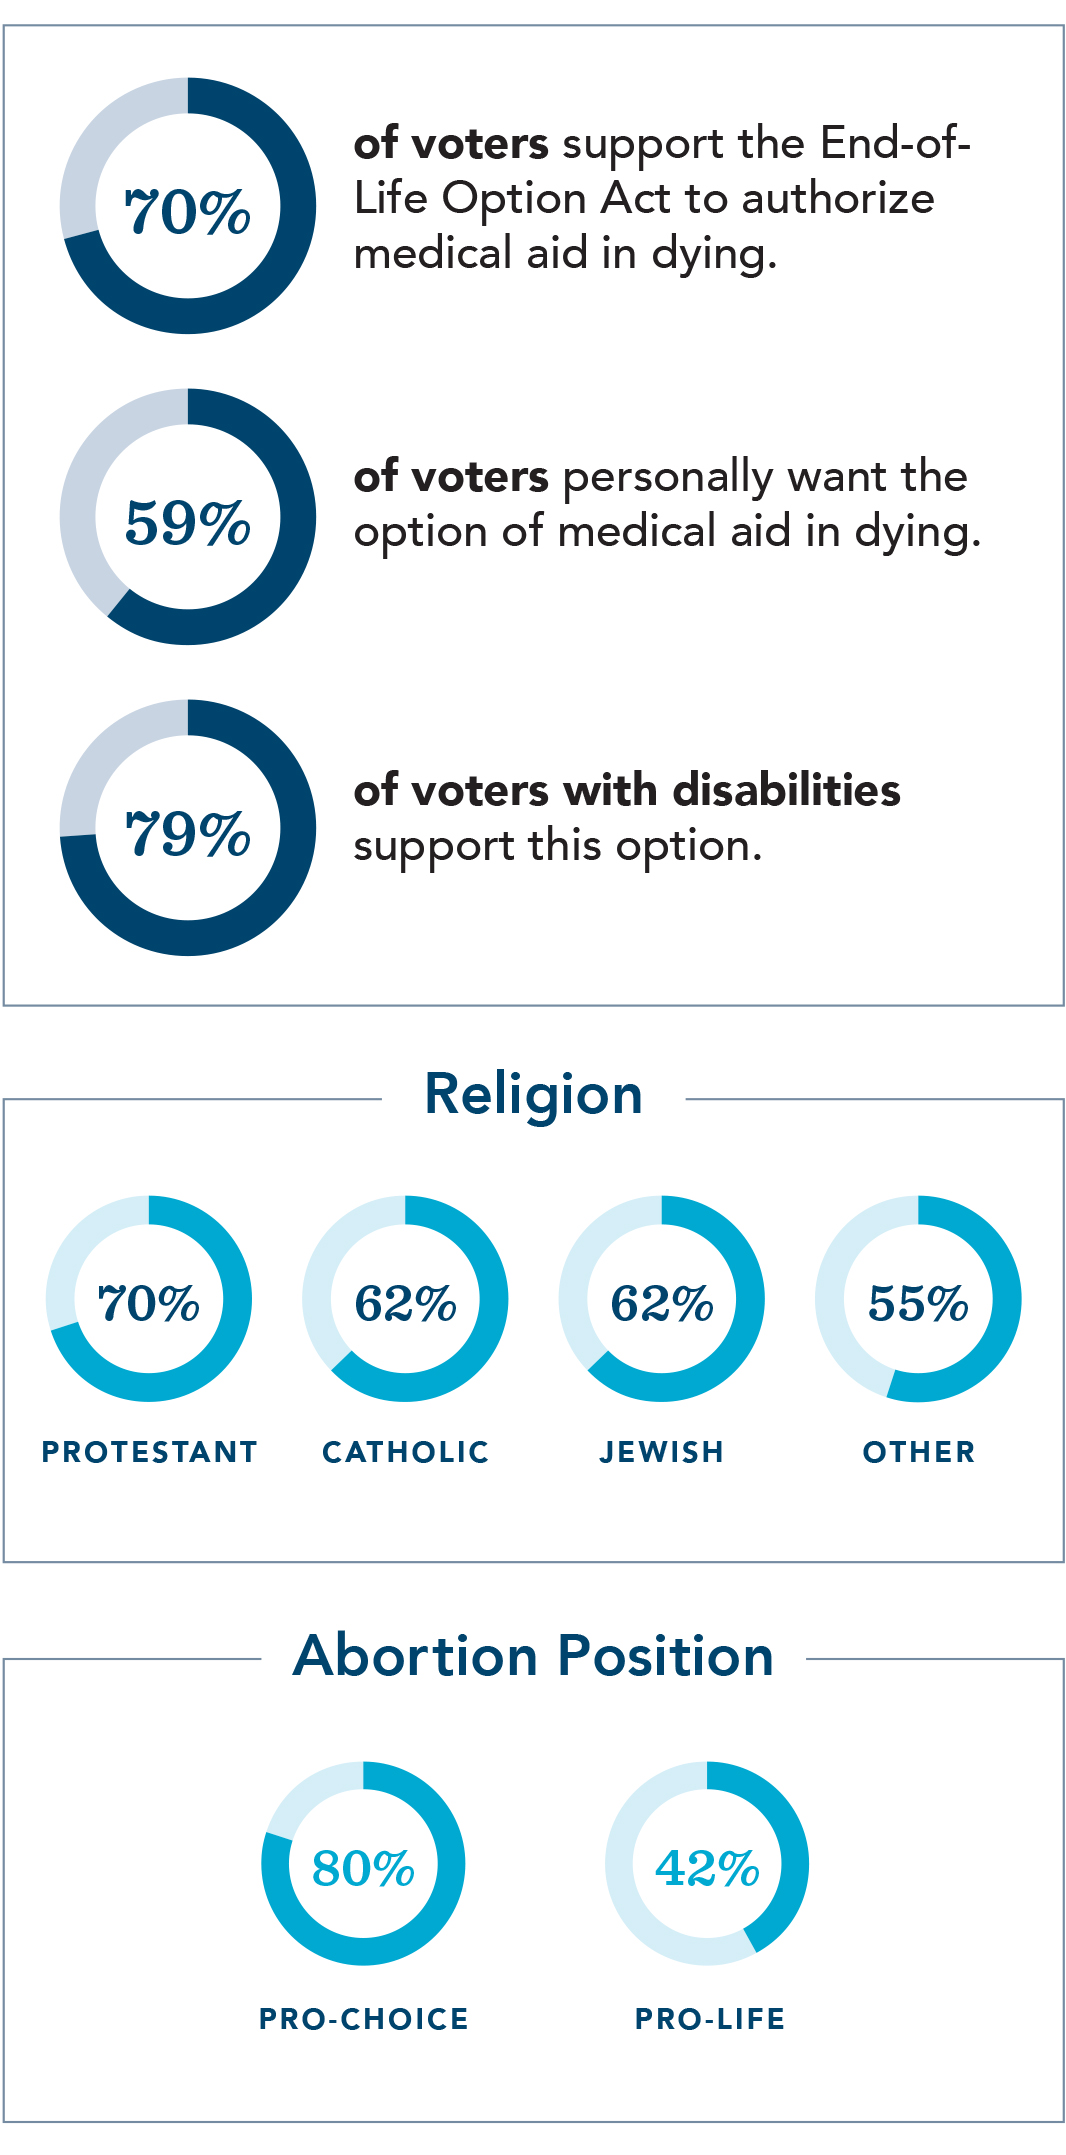 70% of voters support the End-ofLife Option Act to authorize medical aid in dying.